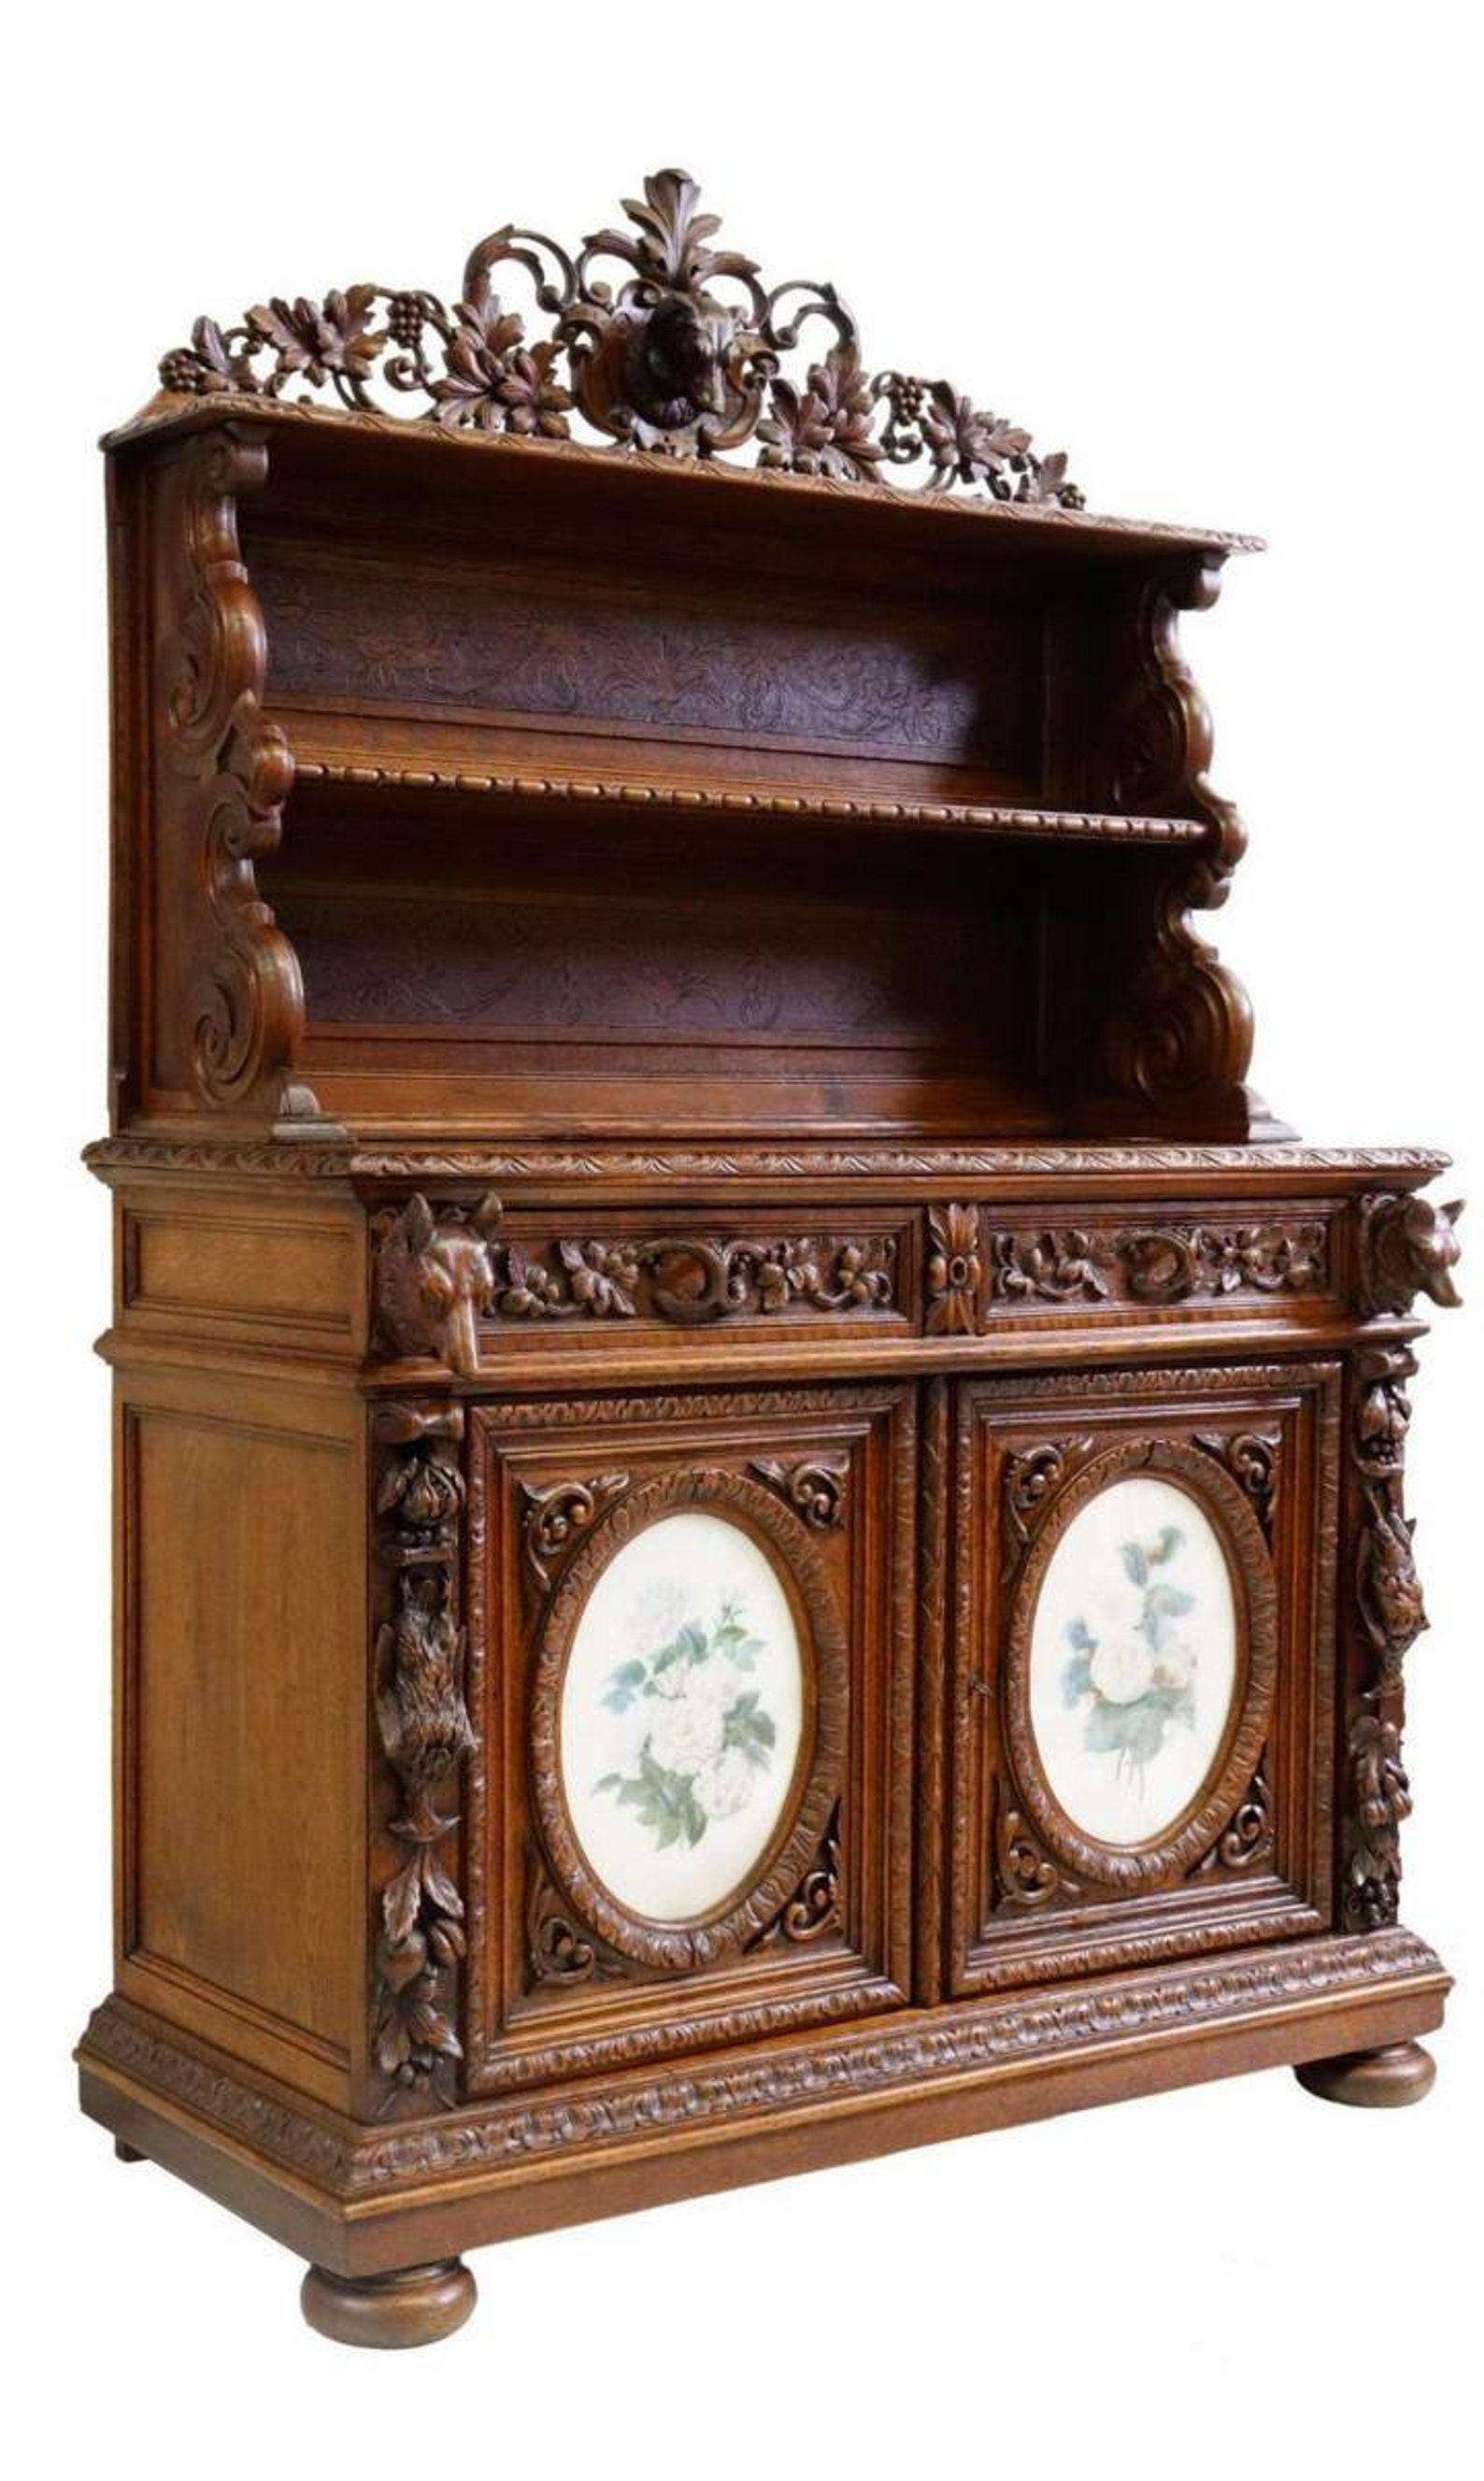 A magnificent antique French Renaissance Revival hunt sideboard, signed, circa 1854.

Exquisitely hand-crafted in France in the mid-19th century, finely hand carved and sculpted solid oak with beautifully aged mellow warm patina, two-piece, the